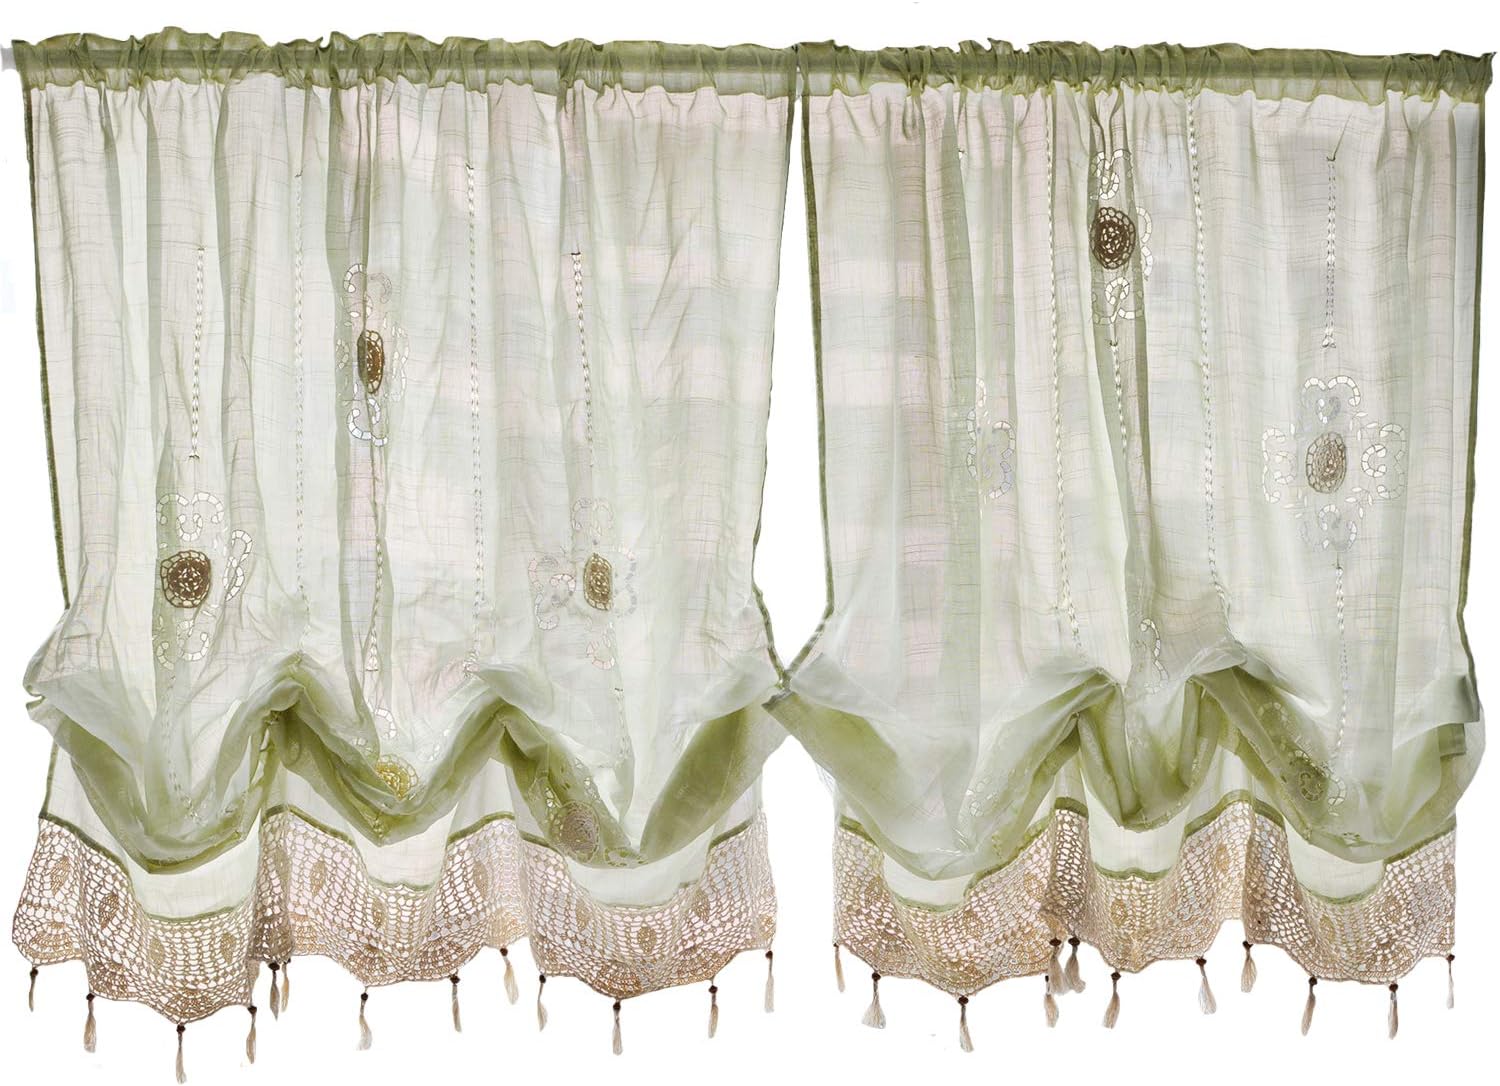 FADFAY Pastoral 57-Inch-by-69-Inch Adjustable Balloon Manual Hook Flower Shade Curtains,Light Green, 1 Panel